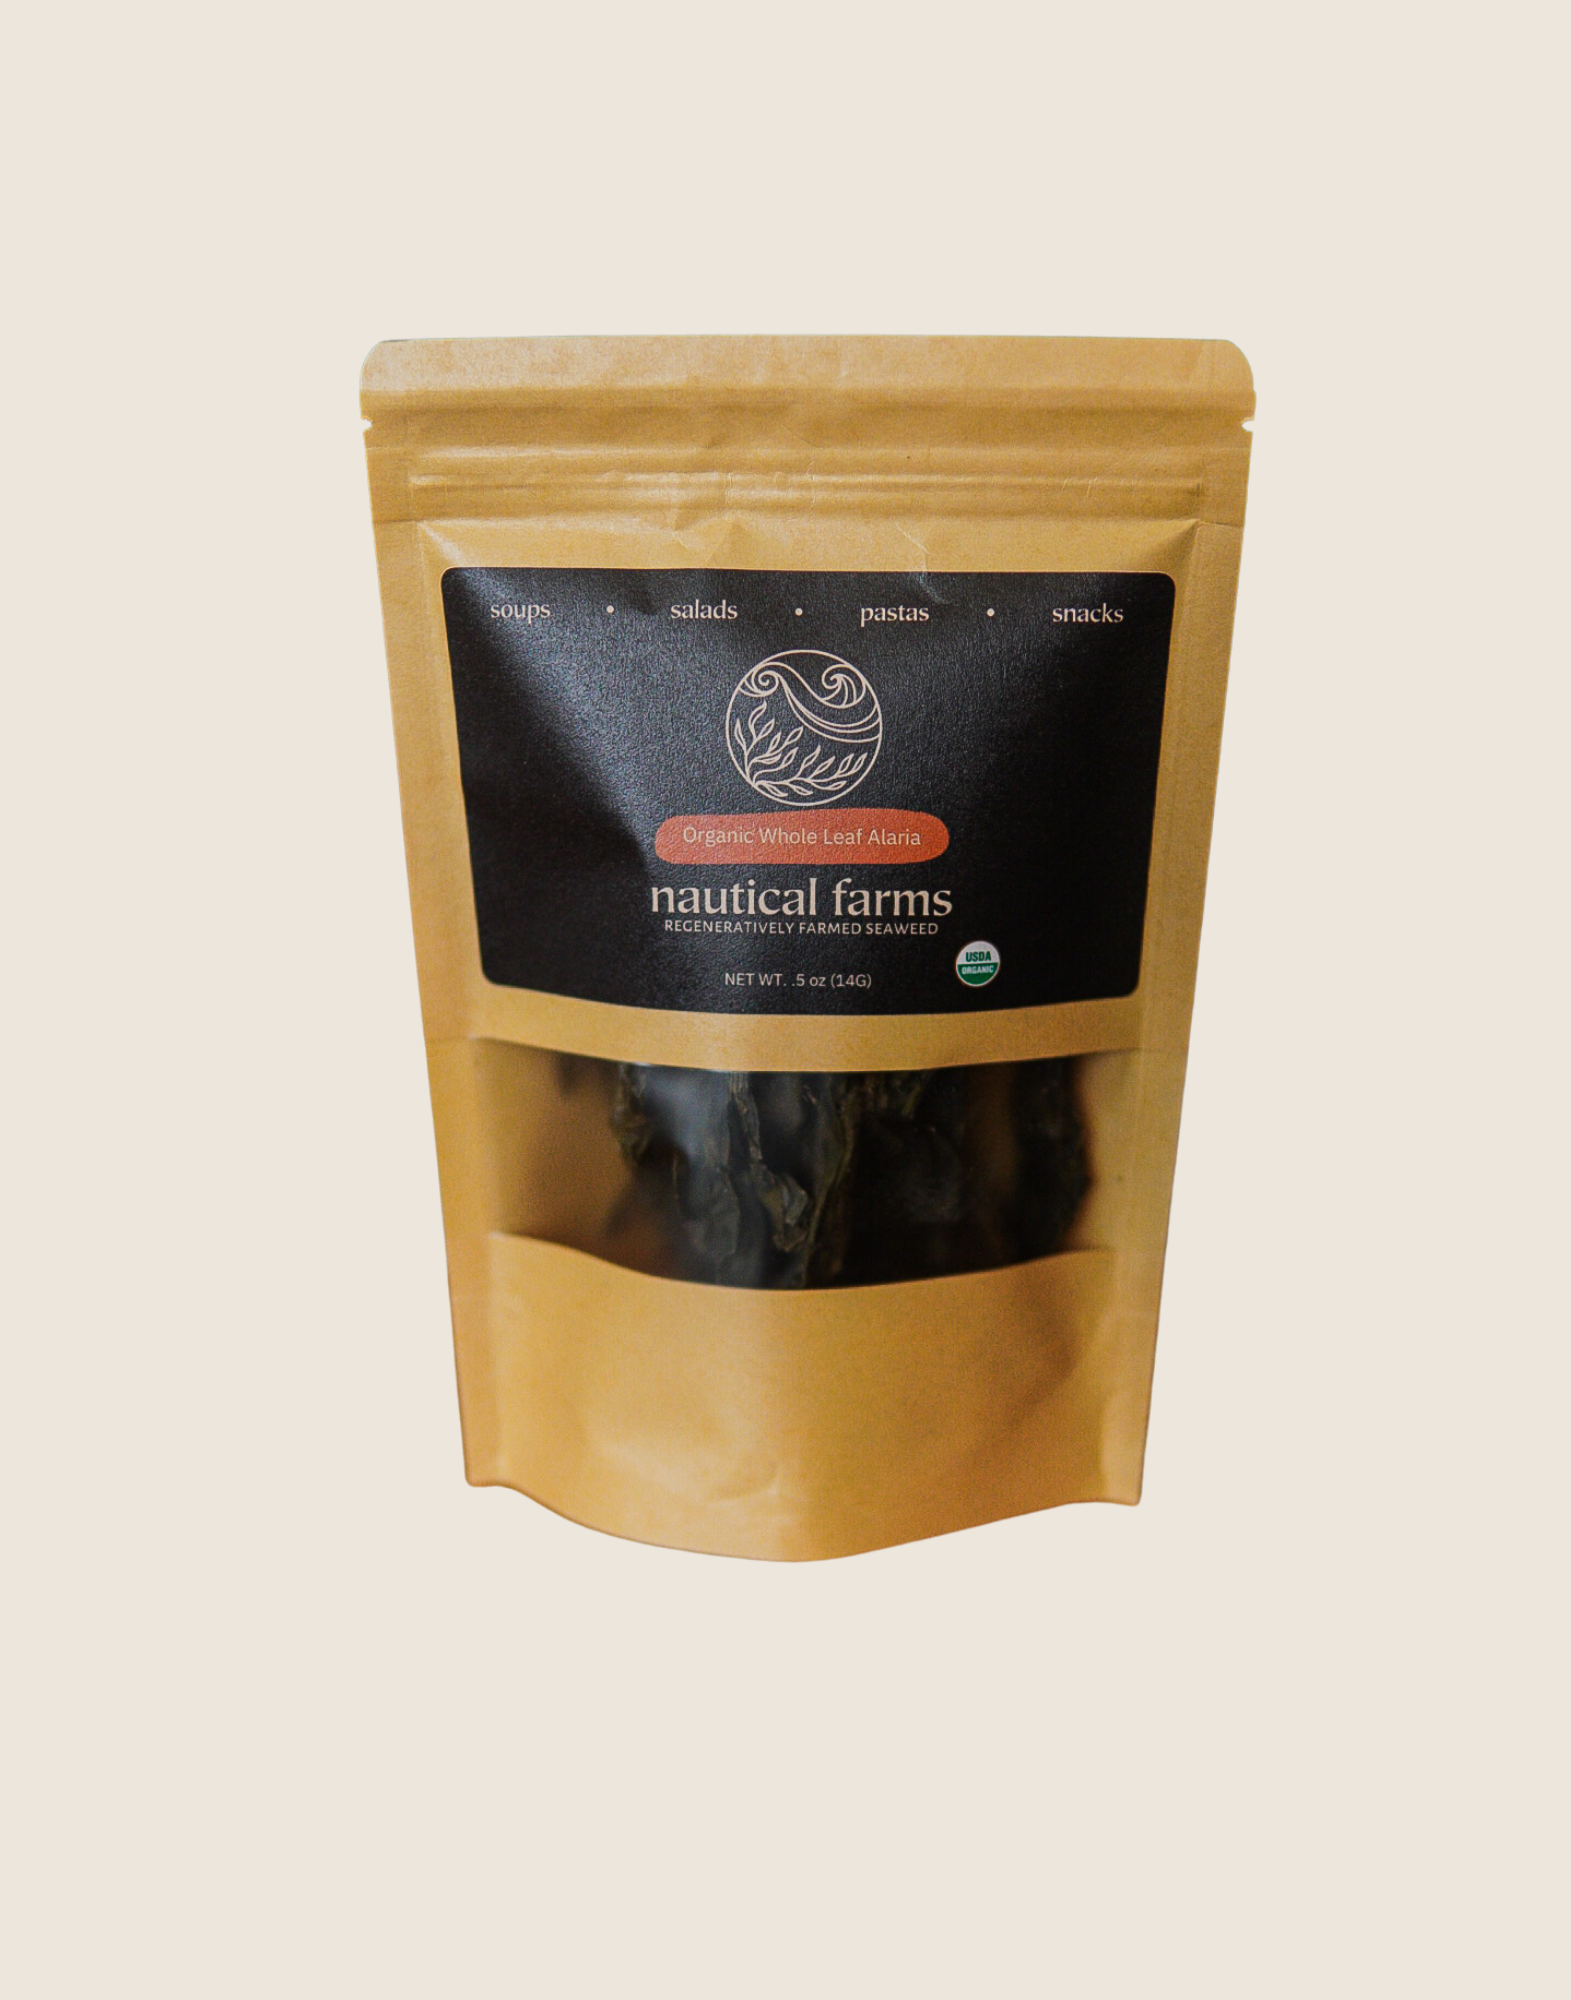 Healthy & natural whole leaf alaria seaweed from Maine kelp farm - Nautical Farms. In a convenient .5 oz bag for snacking or seaweed recipes.